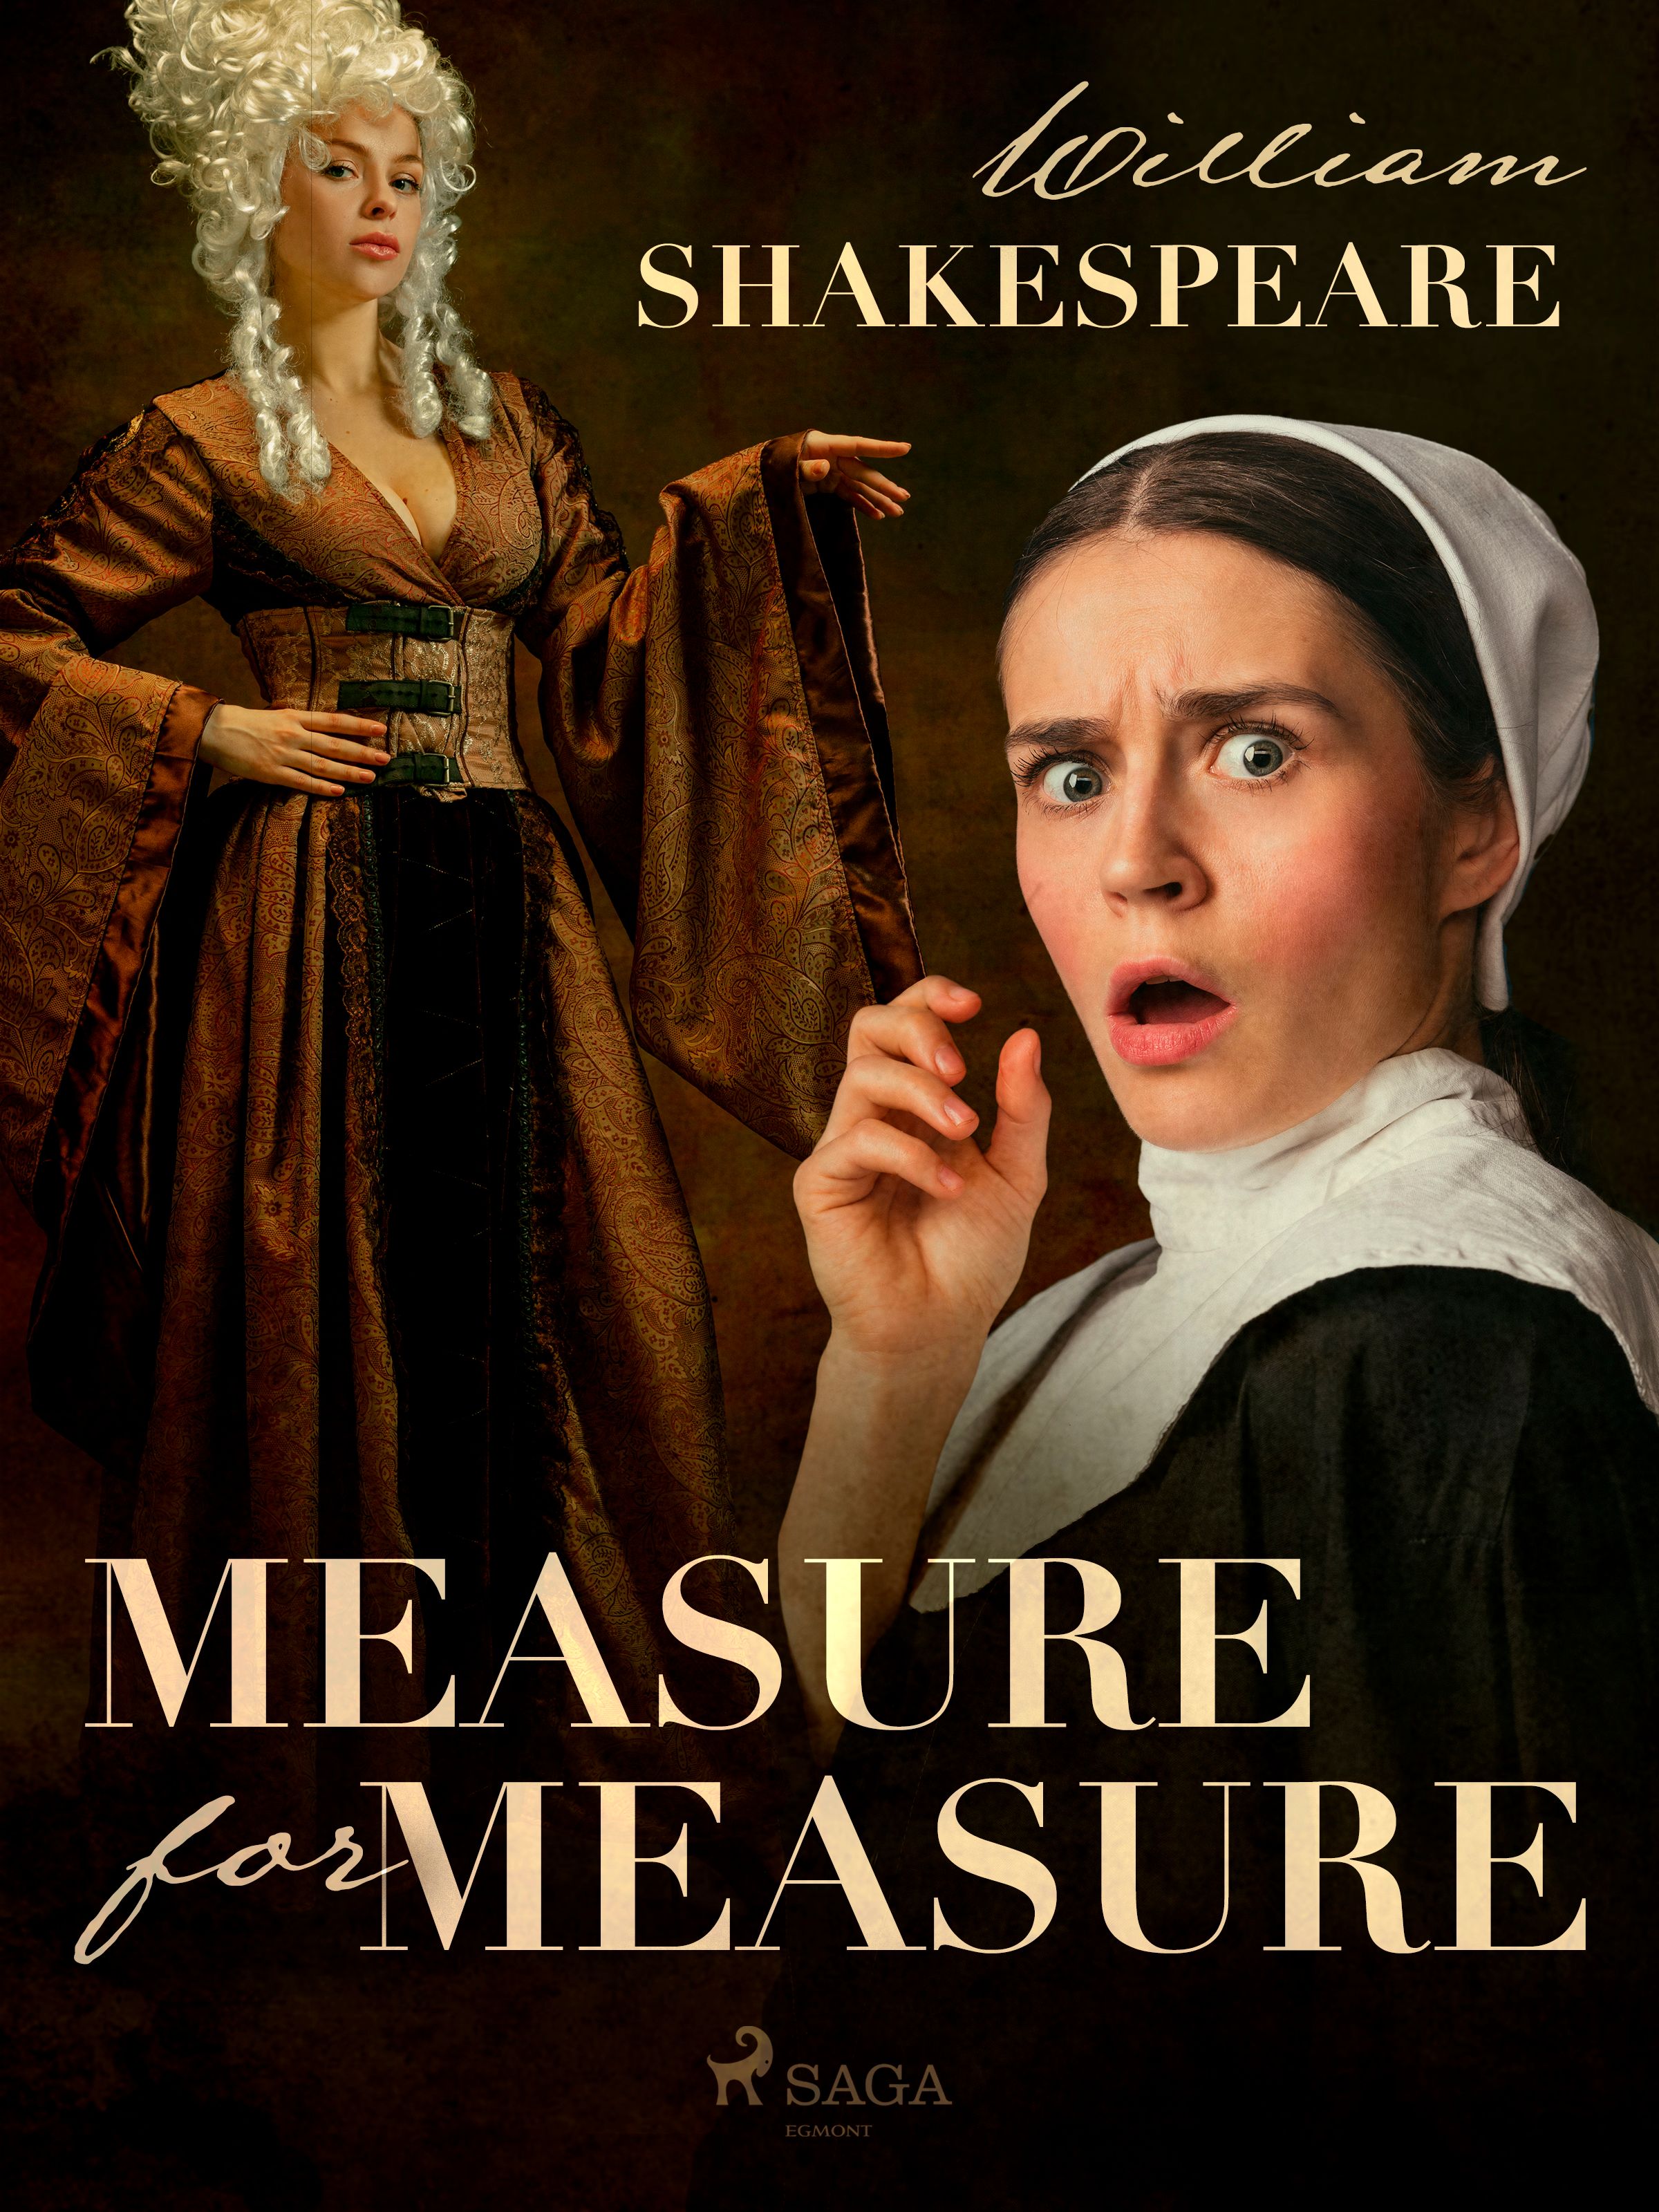 Measure for Measure, eBook by William Shakespeare